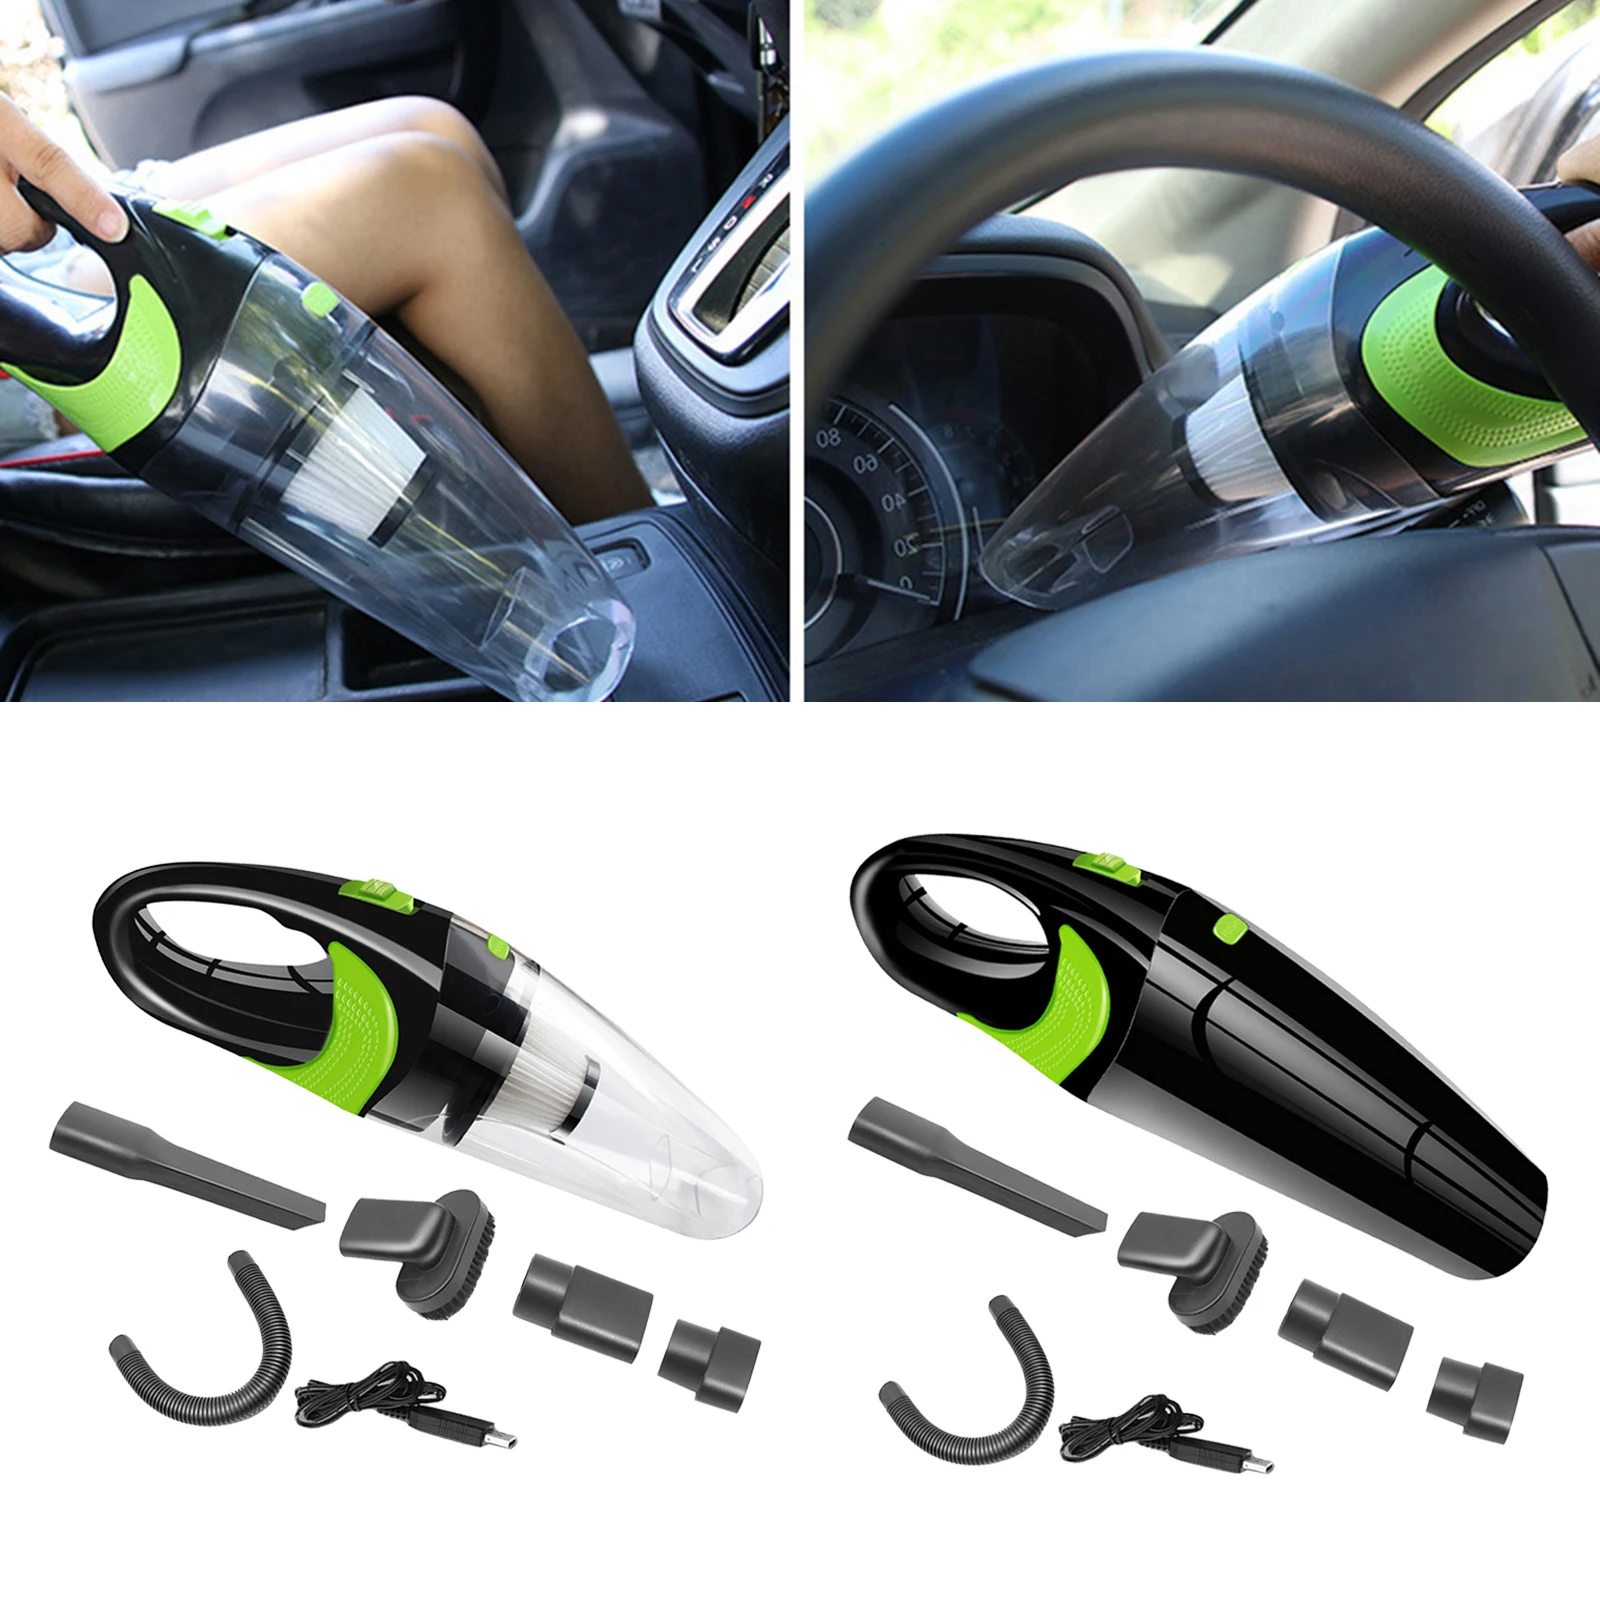 Handheld Car Vacuum 120W High Power 4000PA Wet/Dry for Car Interior Detailing Home Pet Hair Cleaning Accessories